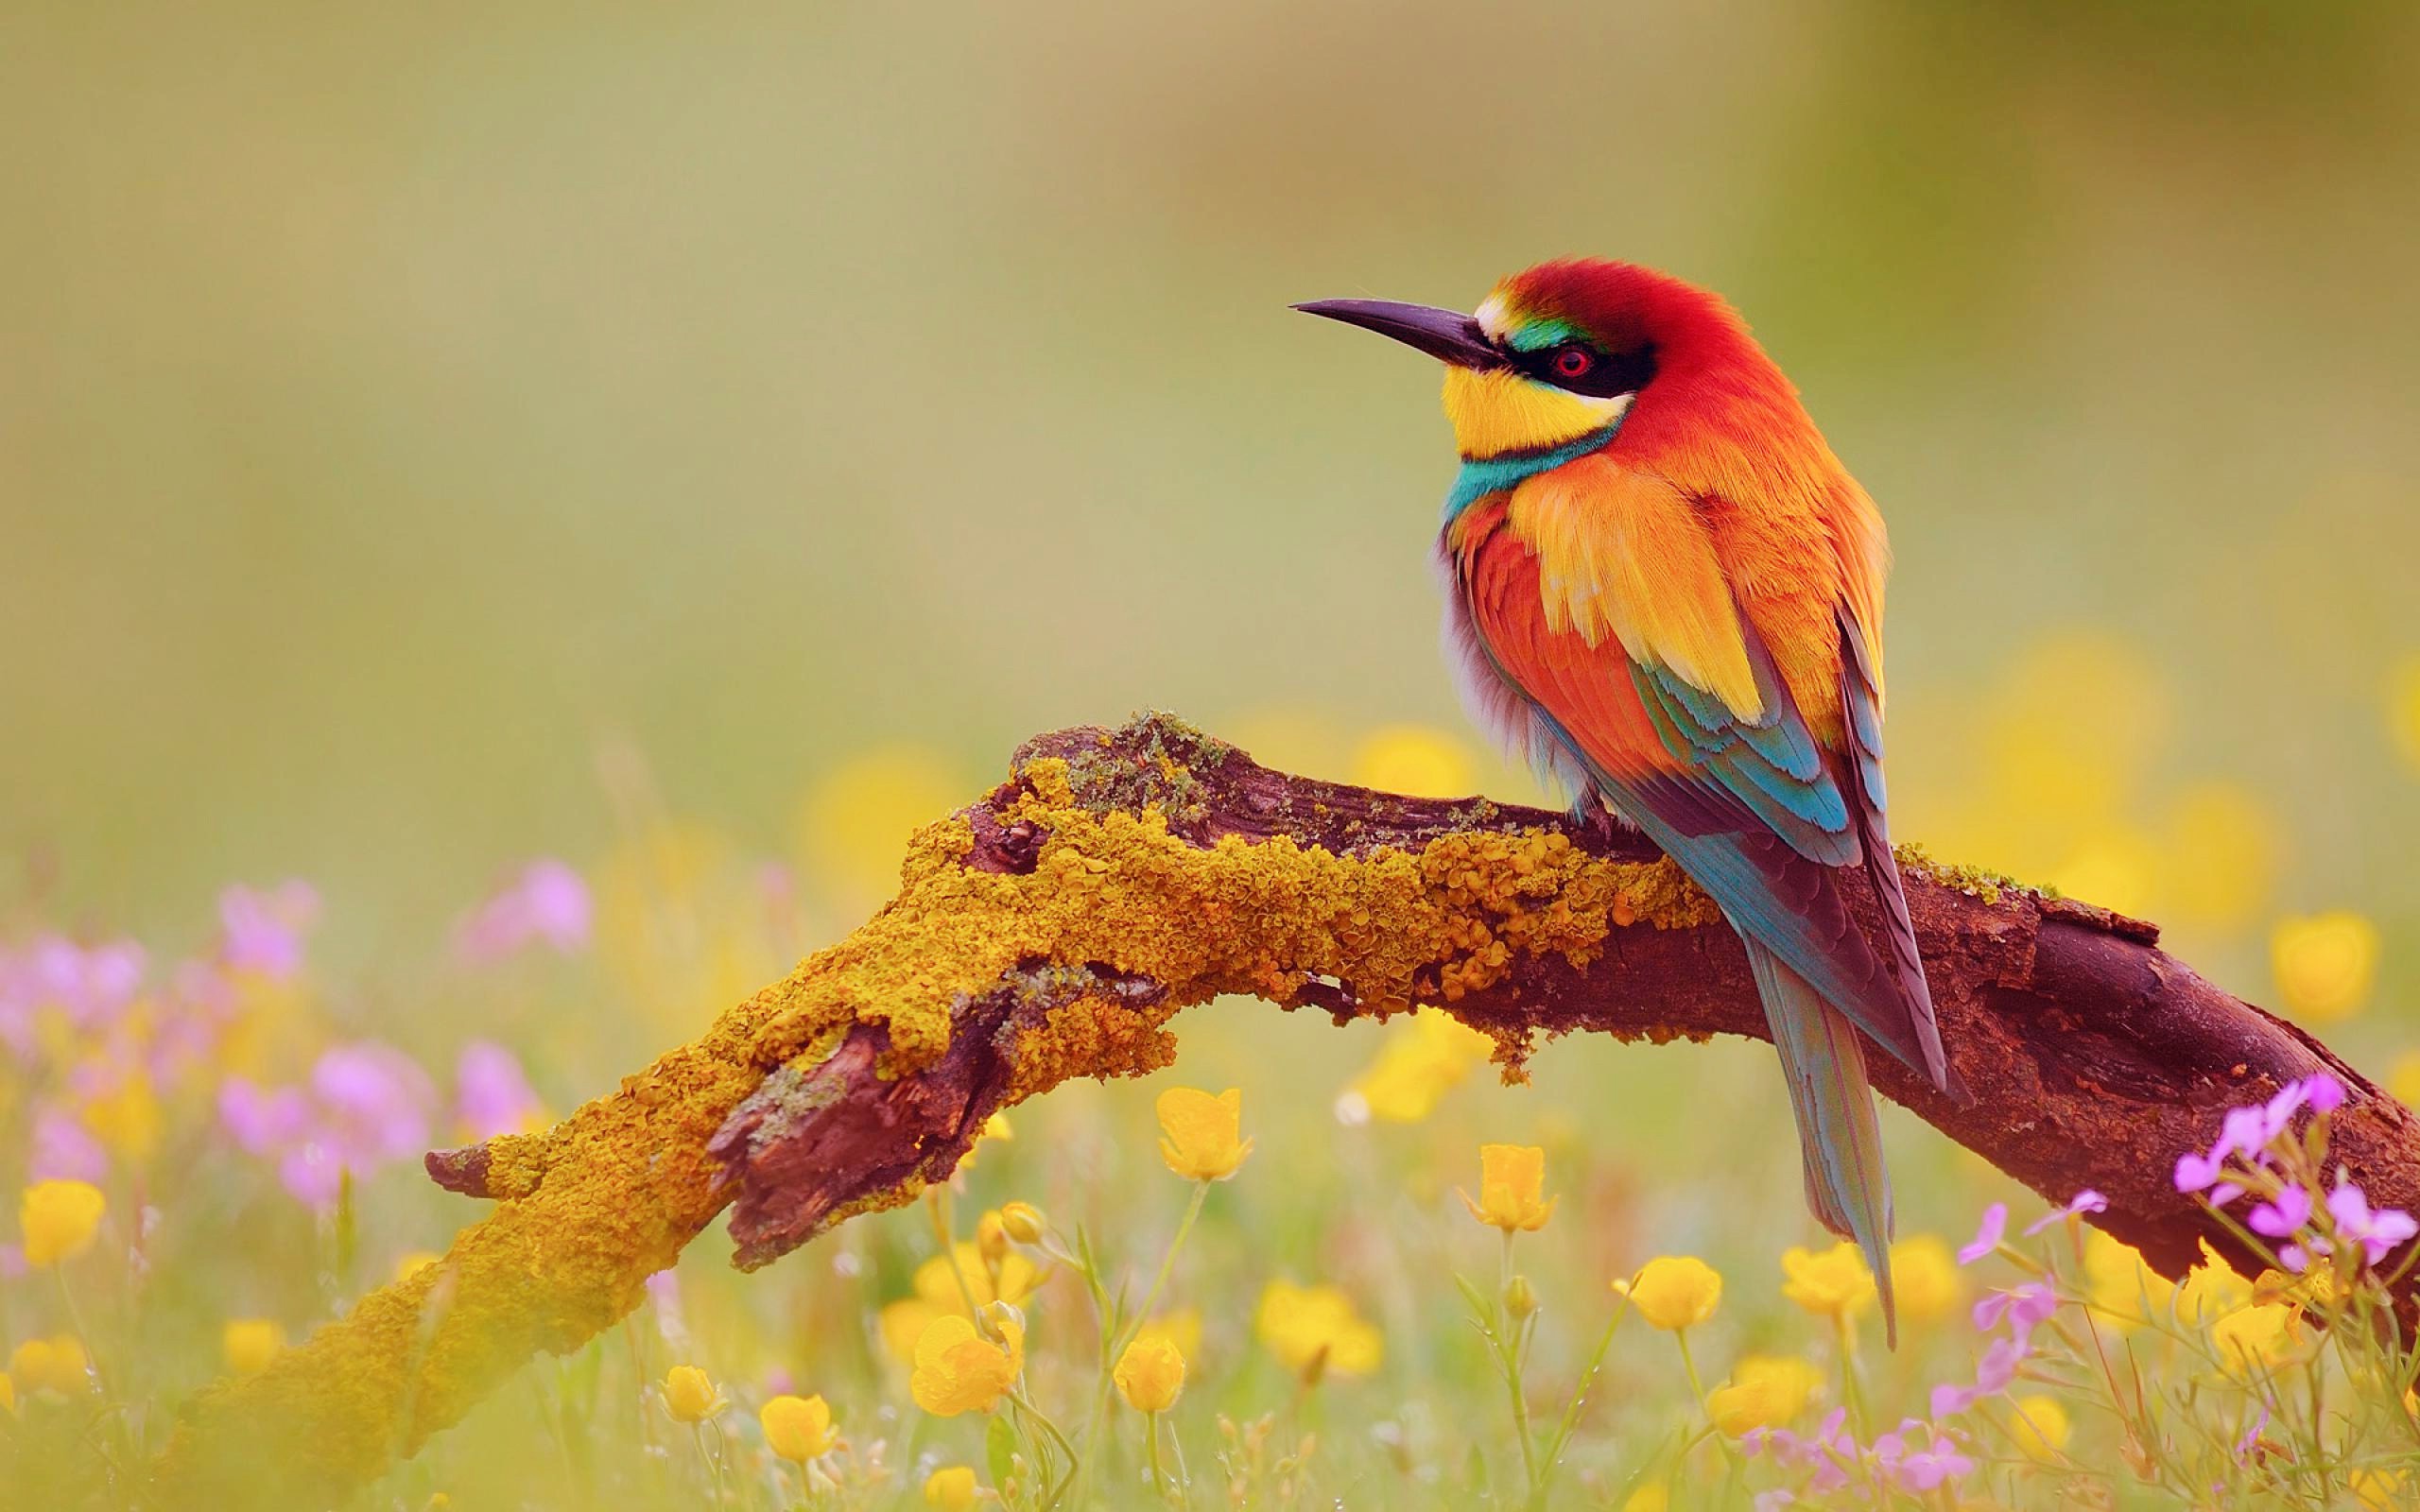 Cute And Pretty Colorful Bird Wallpapers - New HD Wallpapers